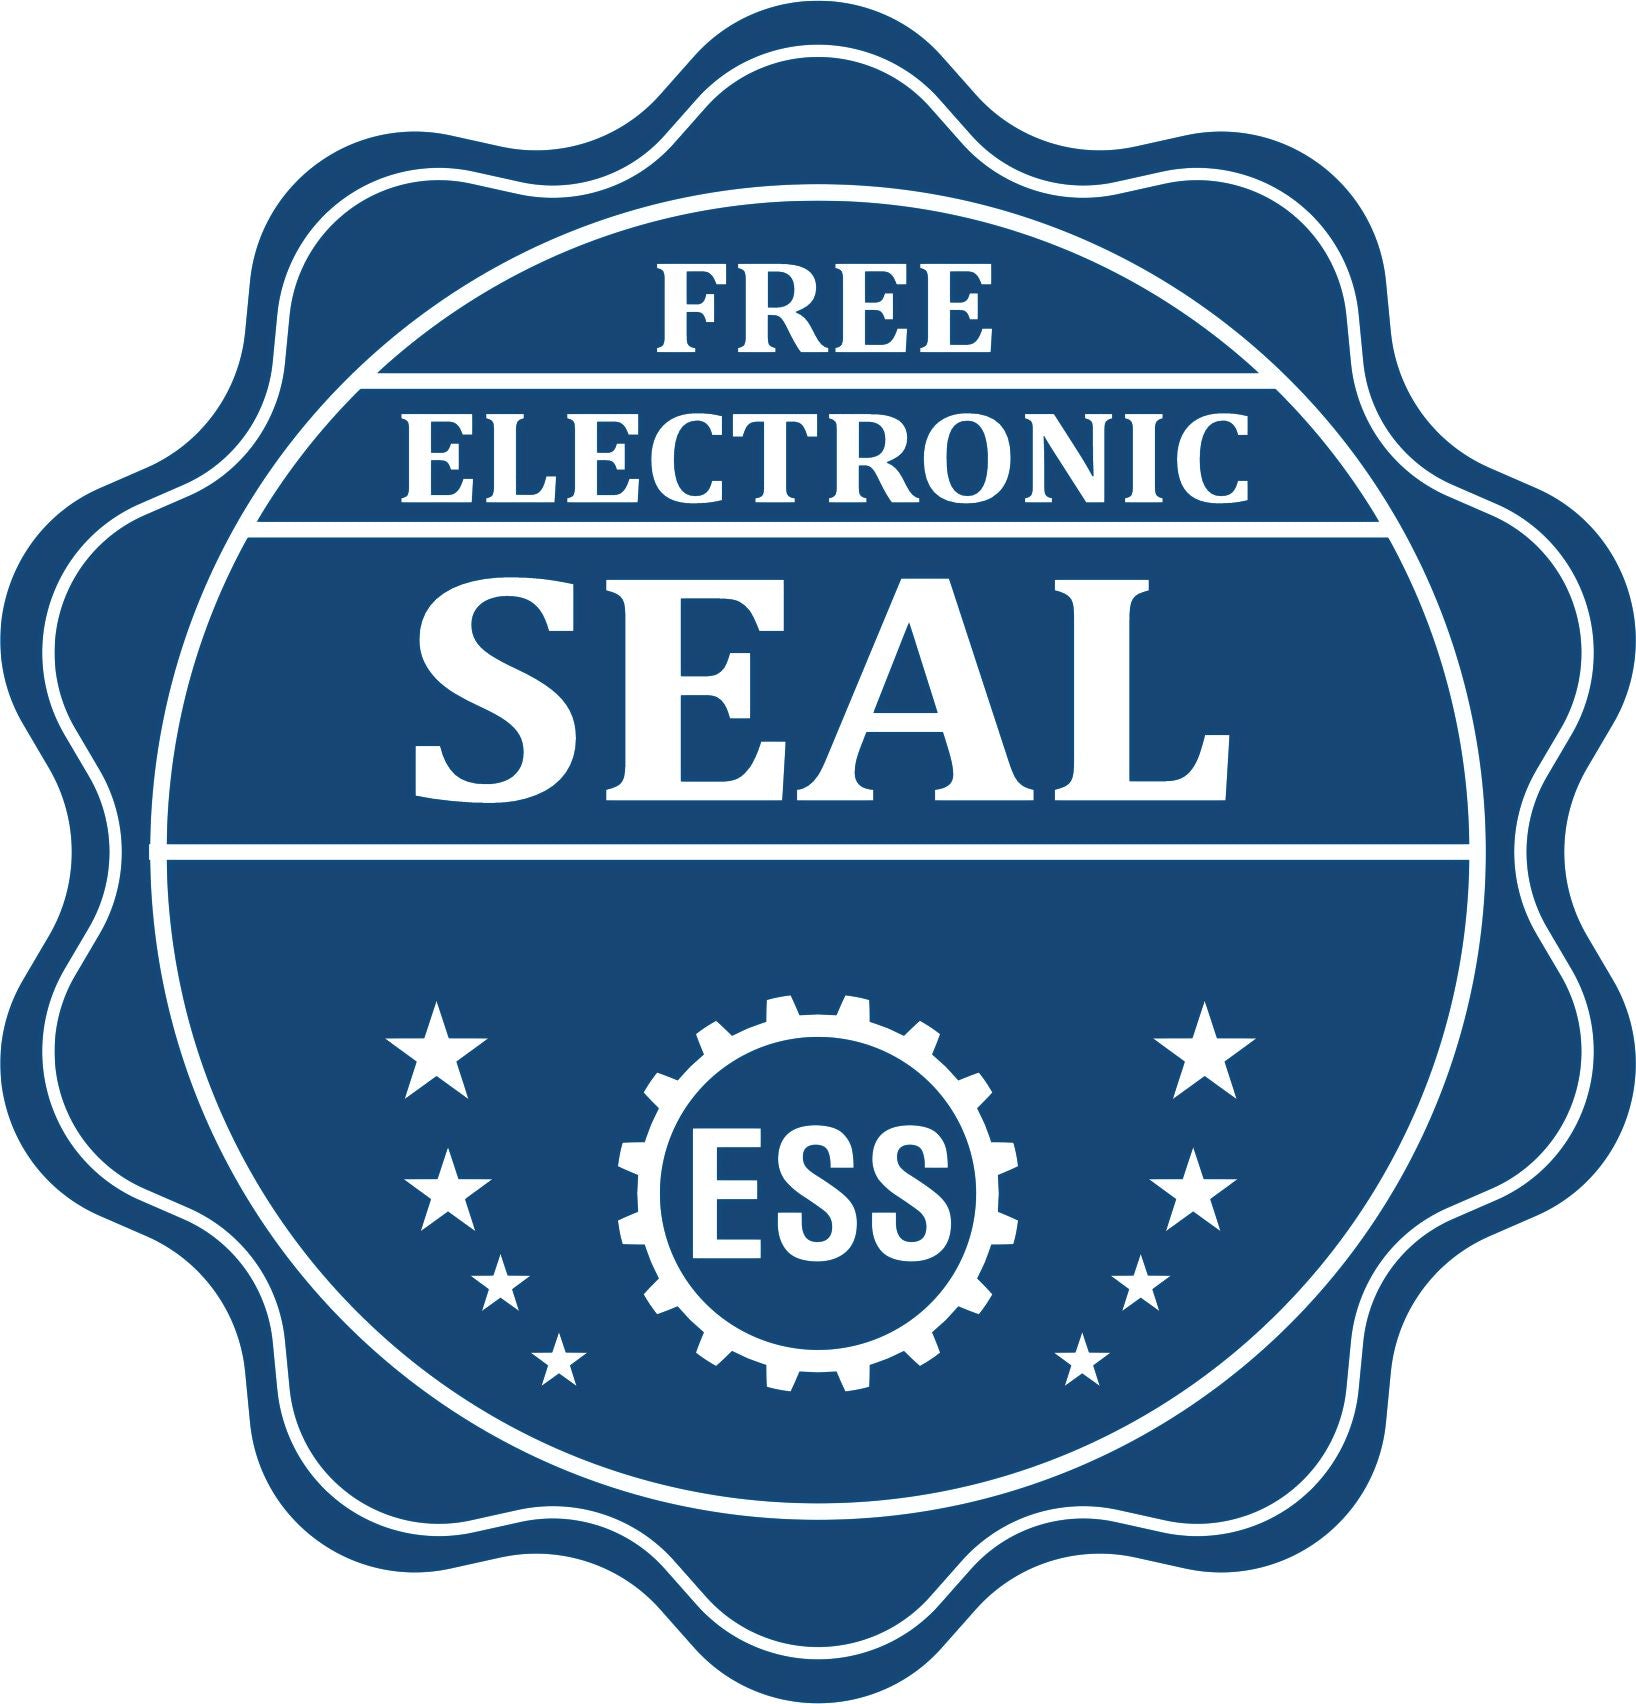 A badge showing a free electronic seal for the Long Reach Georgia Geology Seal with stars and the ESS gear on the emblem.